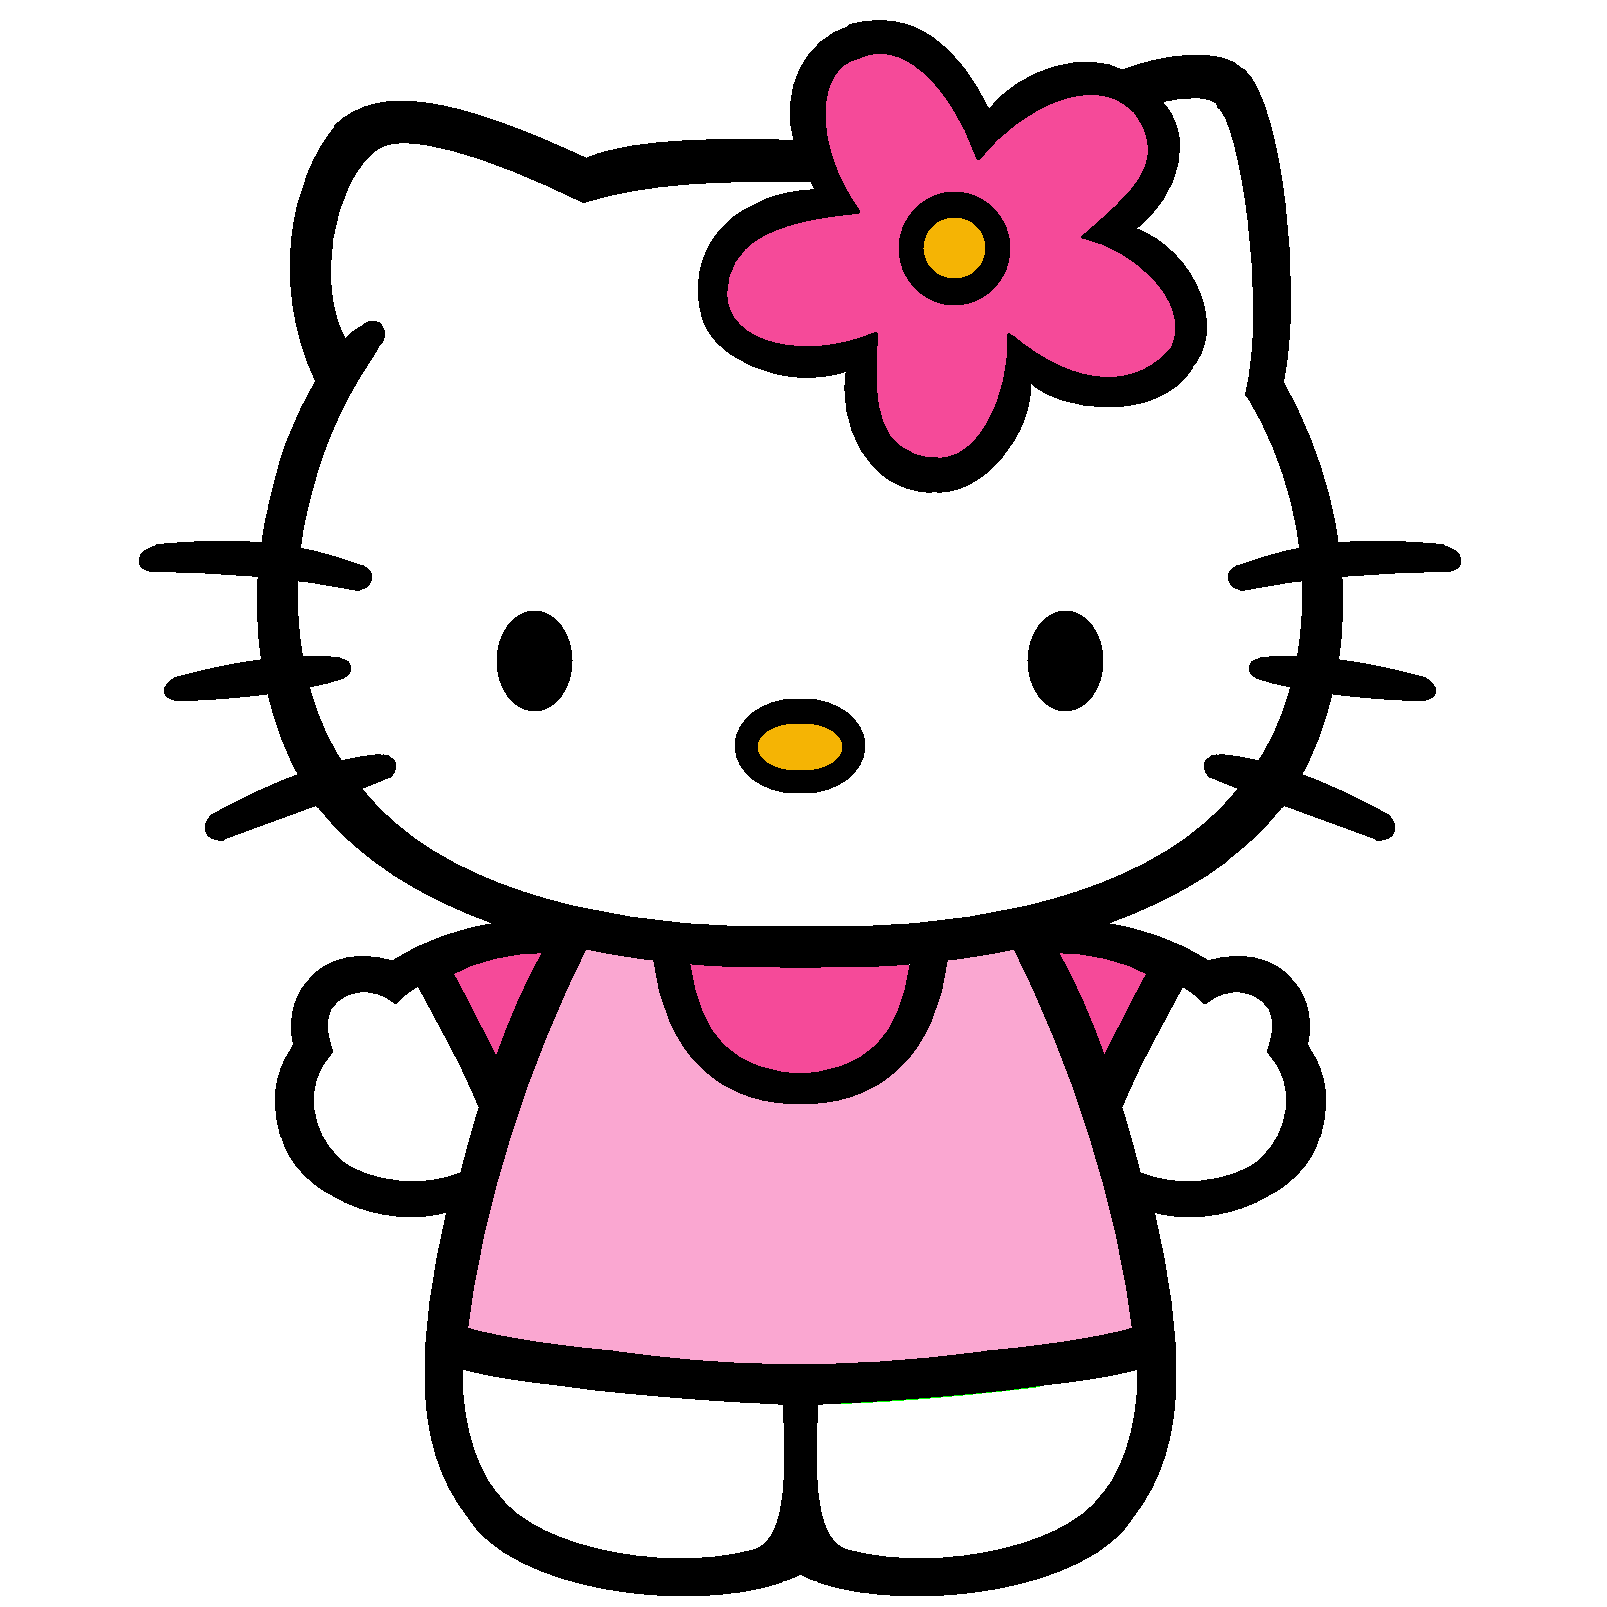 Hello Kitty Logo 1348 Hd Wallpapers in Logos - Imagesci.com